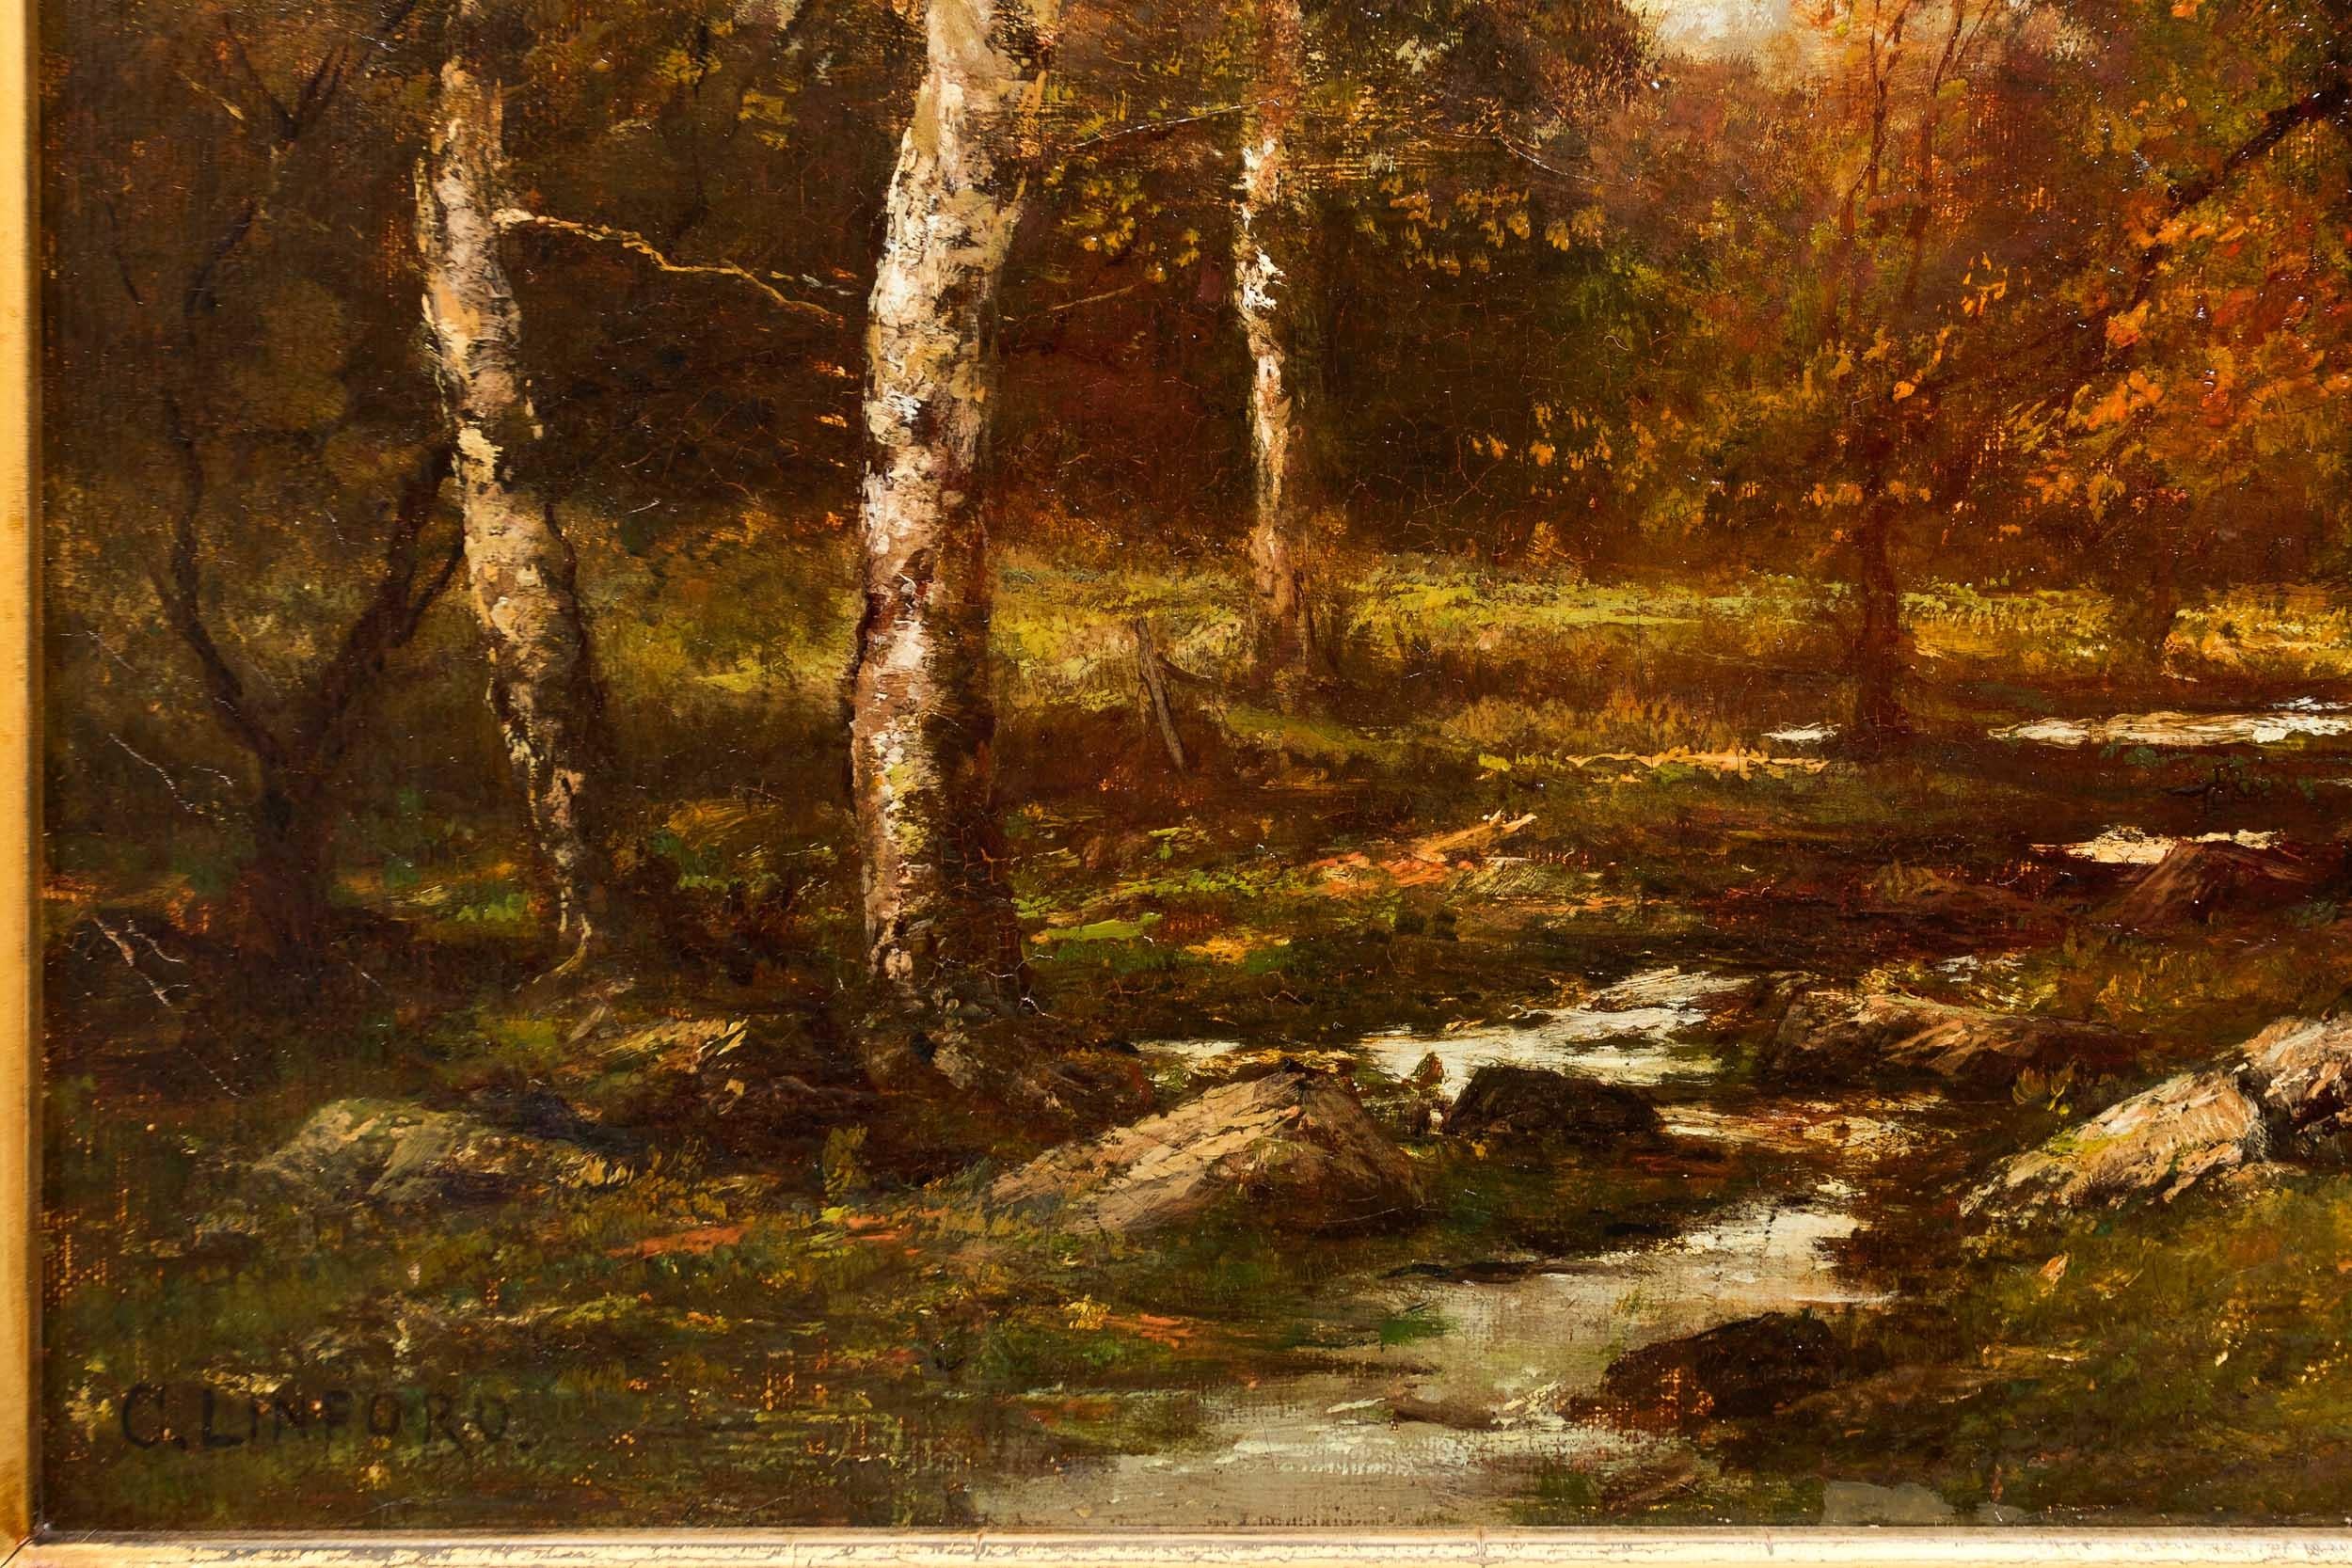 Canvas American Barbizon Painting with Autumn Landscape of Birches by Charles Linford